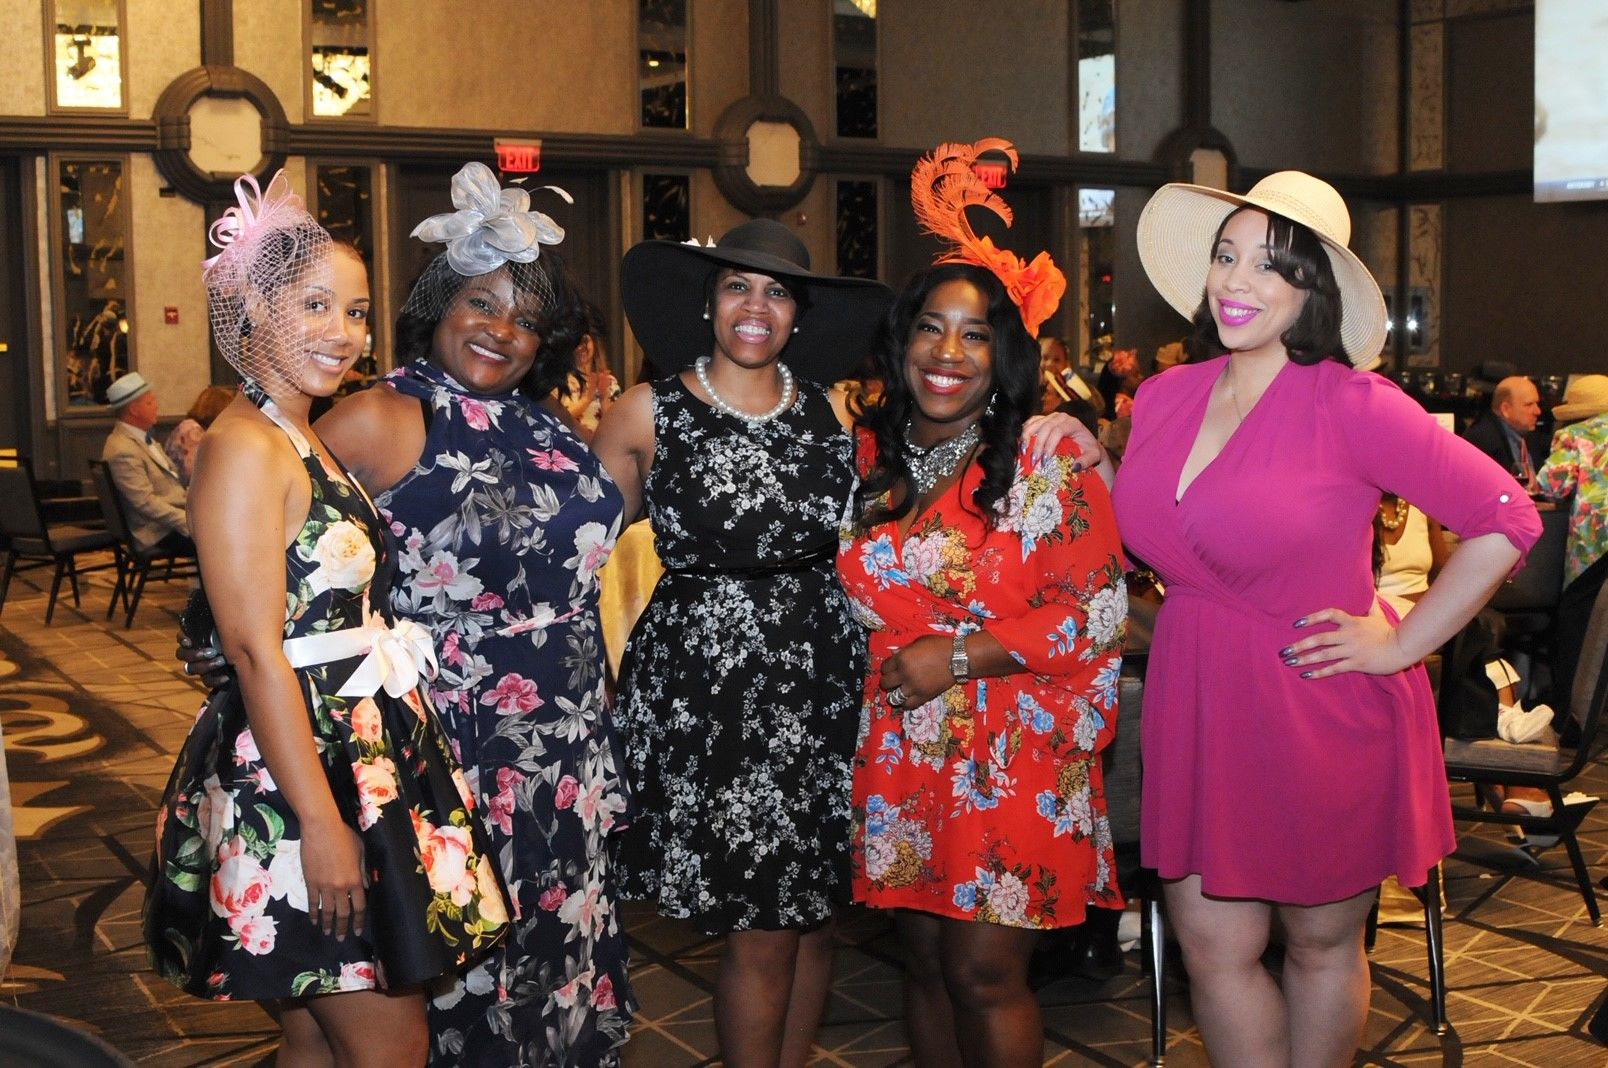 Kentucky Derby Party, D.C. lifestyle